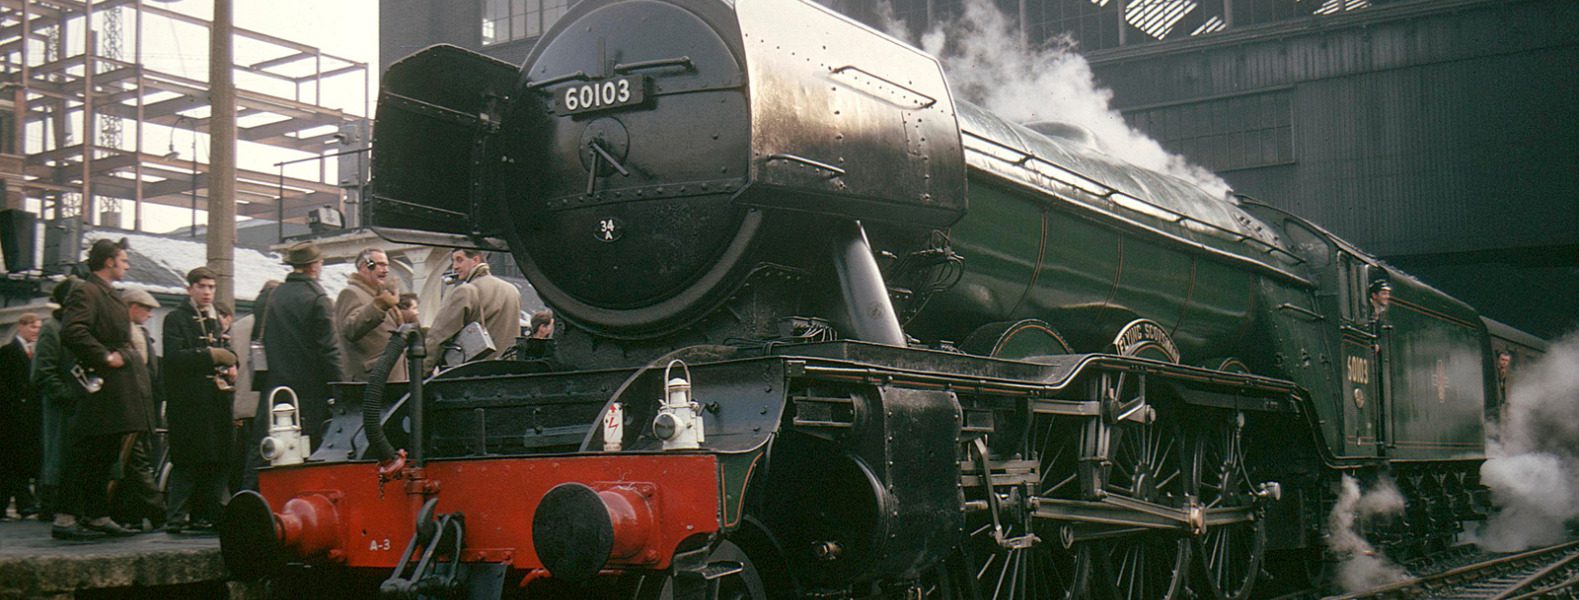 The Flying Scotsman steam train on the tracks at London Kings Cross station